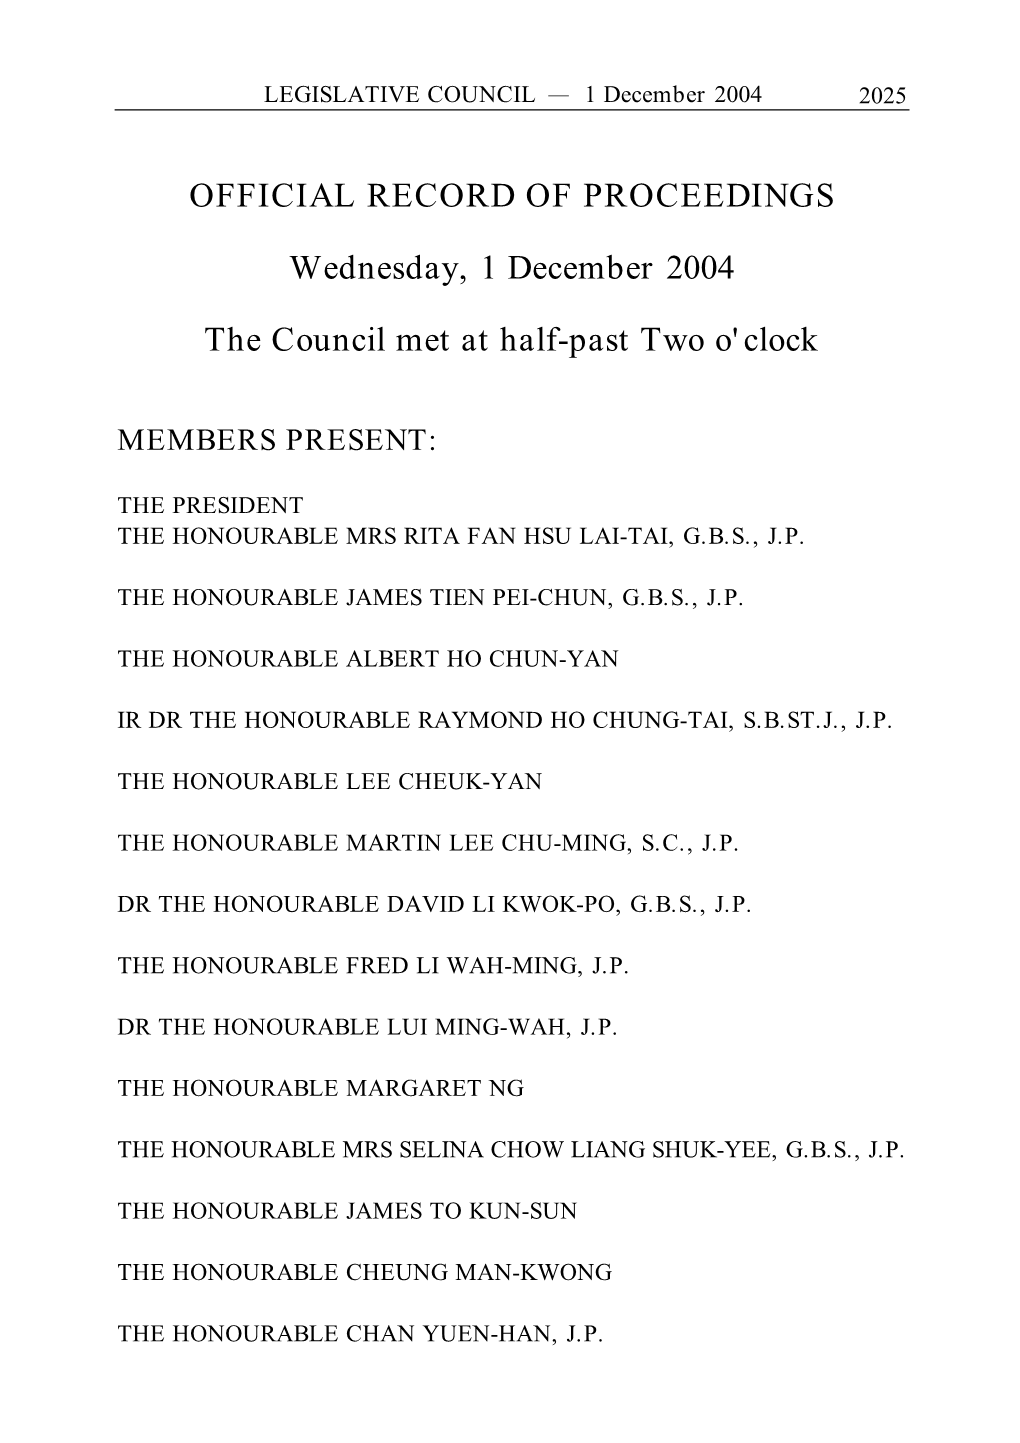 OFFICIAL RECORD of PROCEEDINGS Wednesday, 1